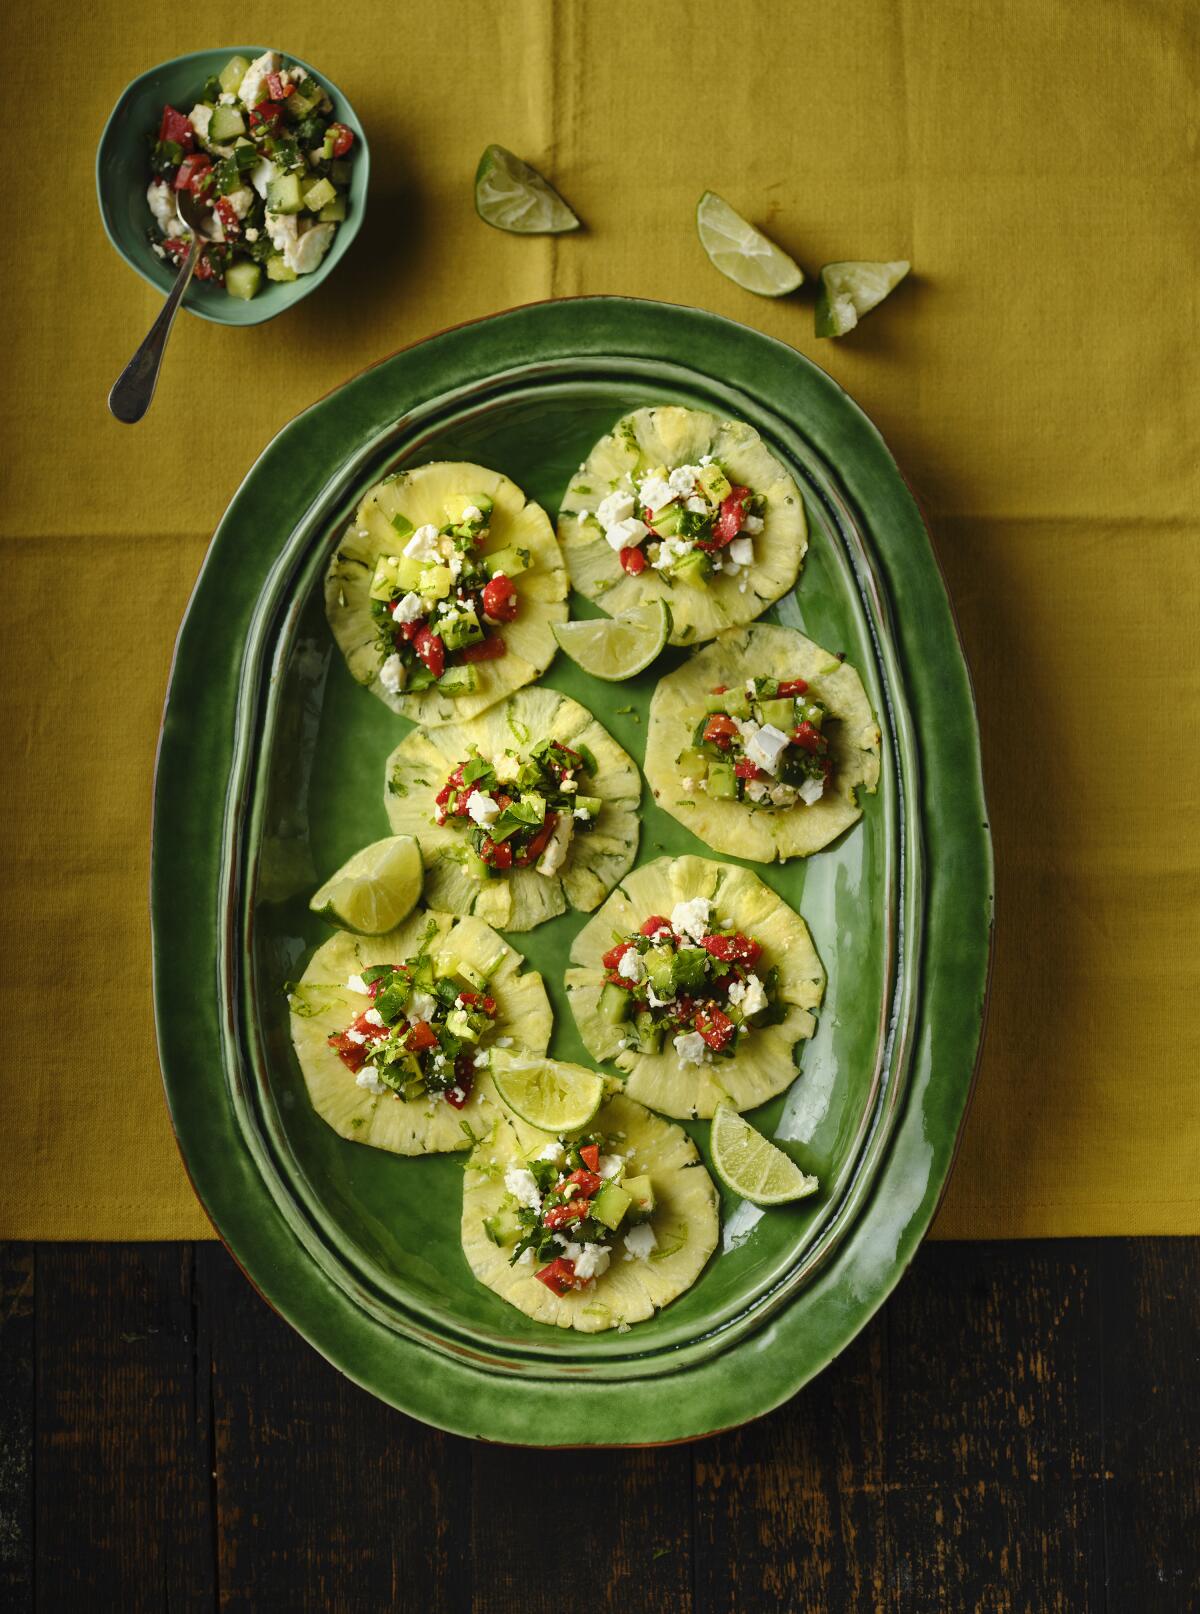 Veggie Pineapple Tacos are topped with cucumbers, red peppers or cherry tomatoes, cilantro, lime and Greek feta.